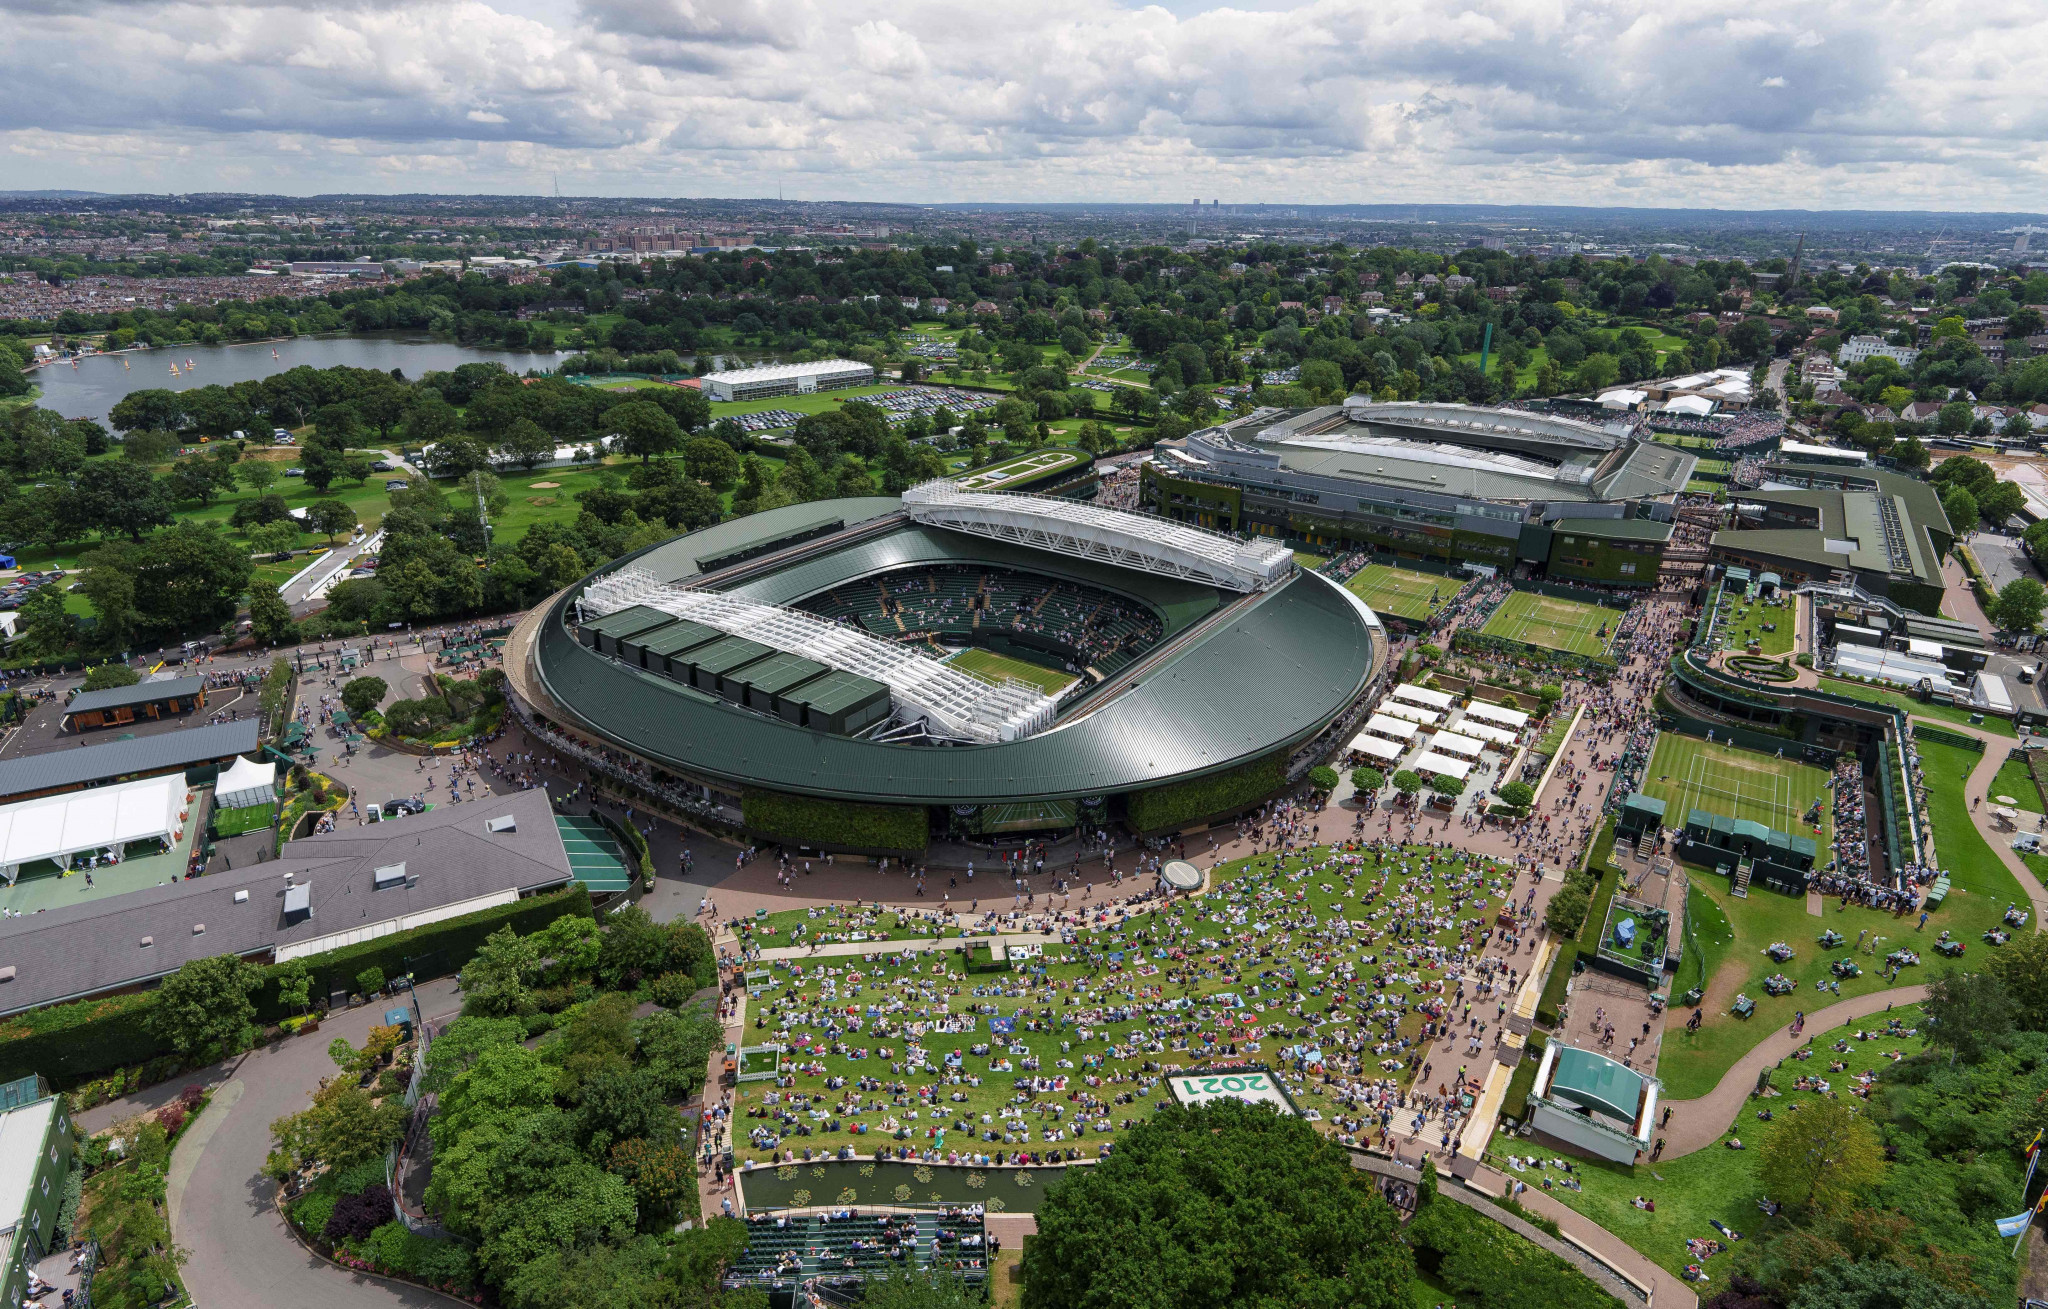 Wimbledon faces losing its ranking points over its decision to ban Russian and Belarusian players ©Getty Images